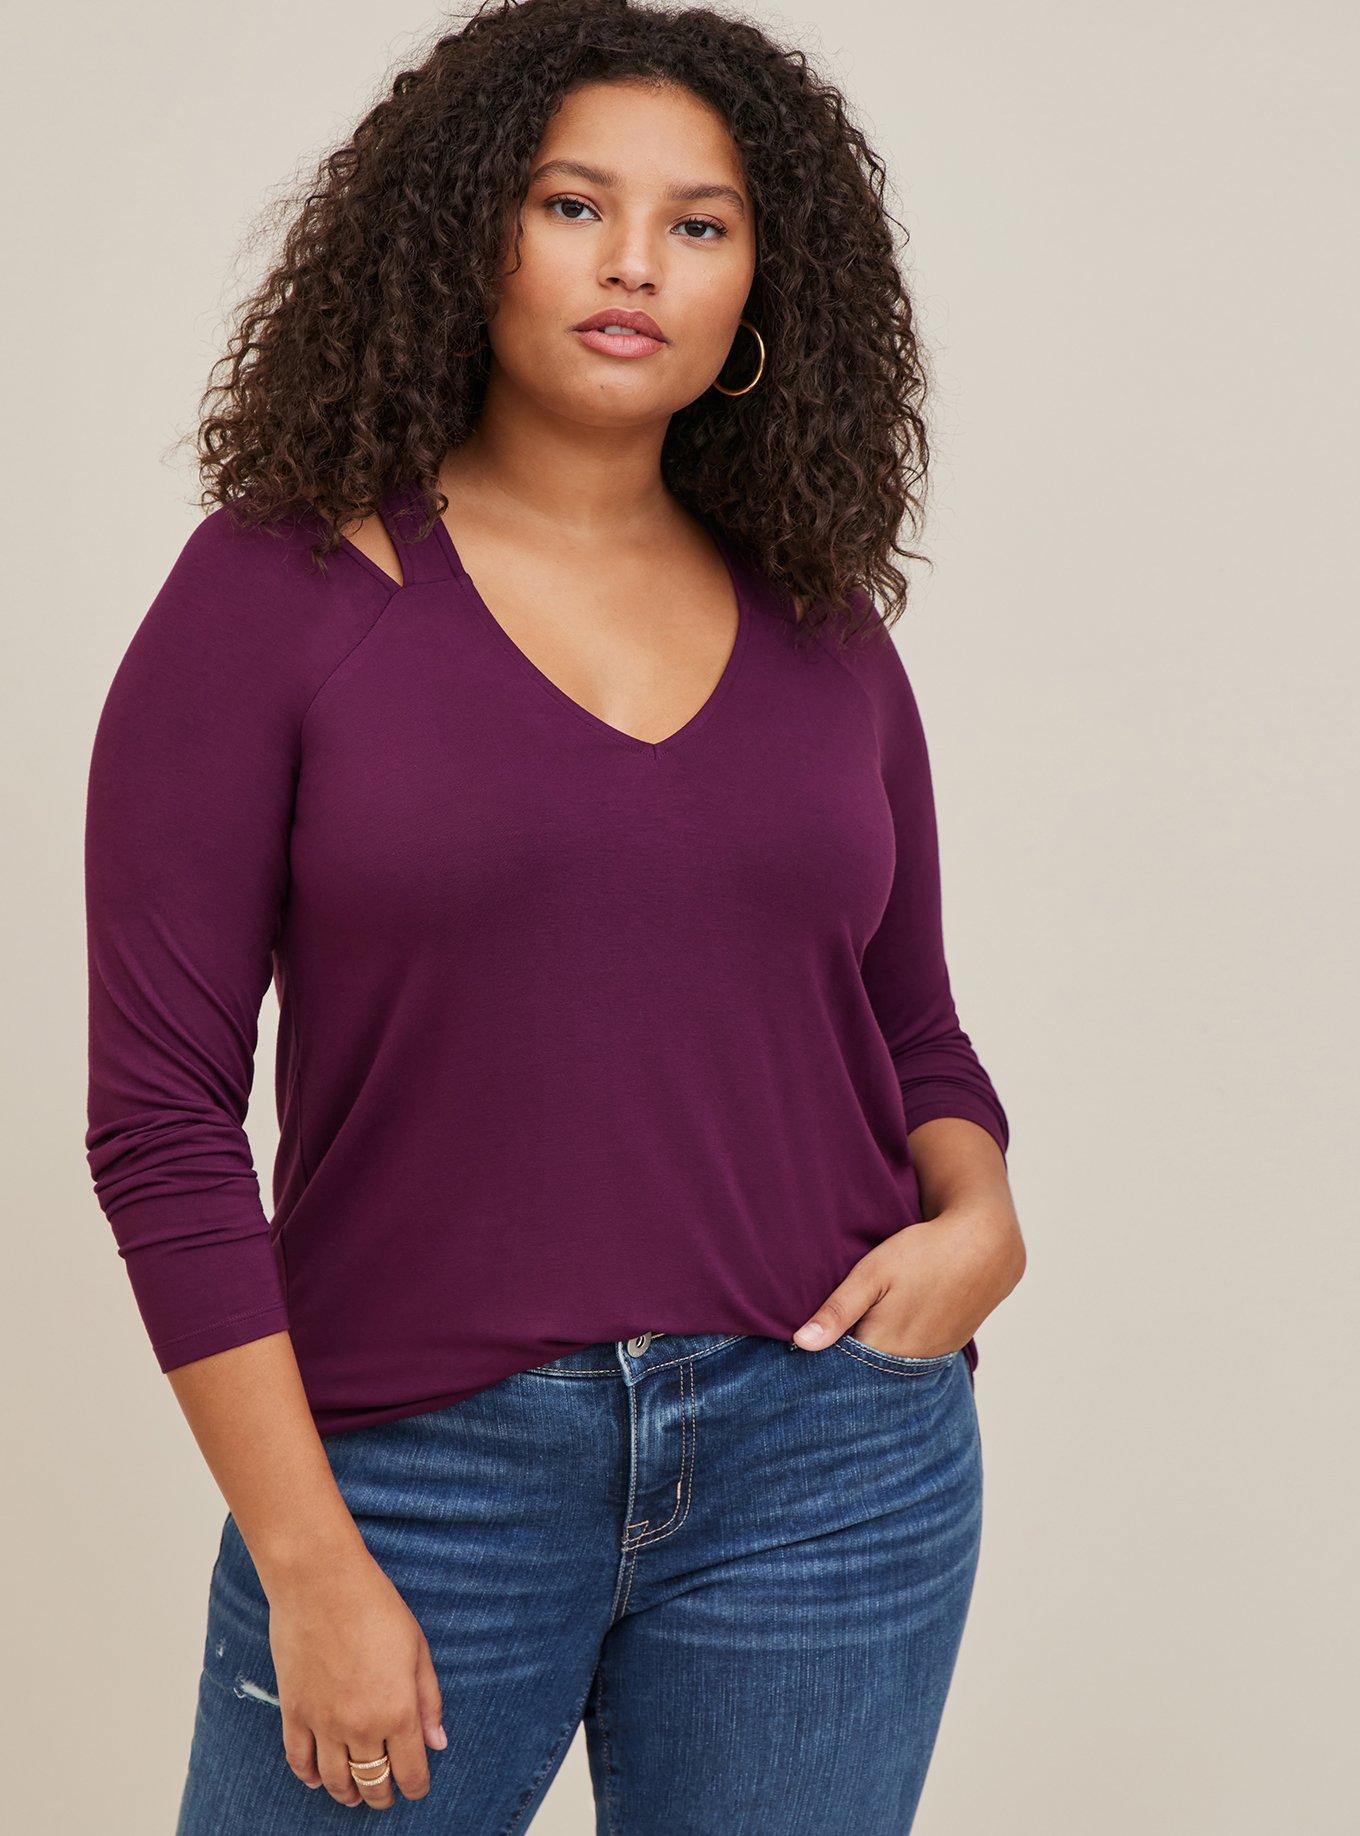 Super Soft Cut-Out Long Sleeve Top